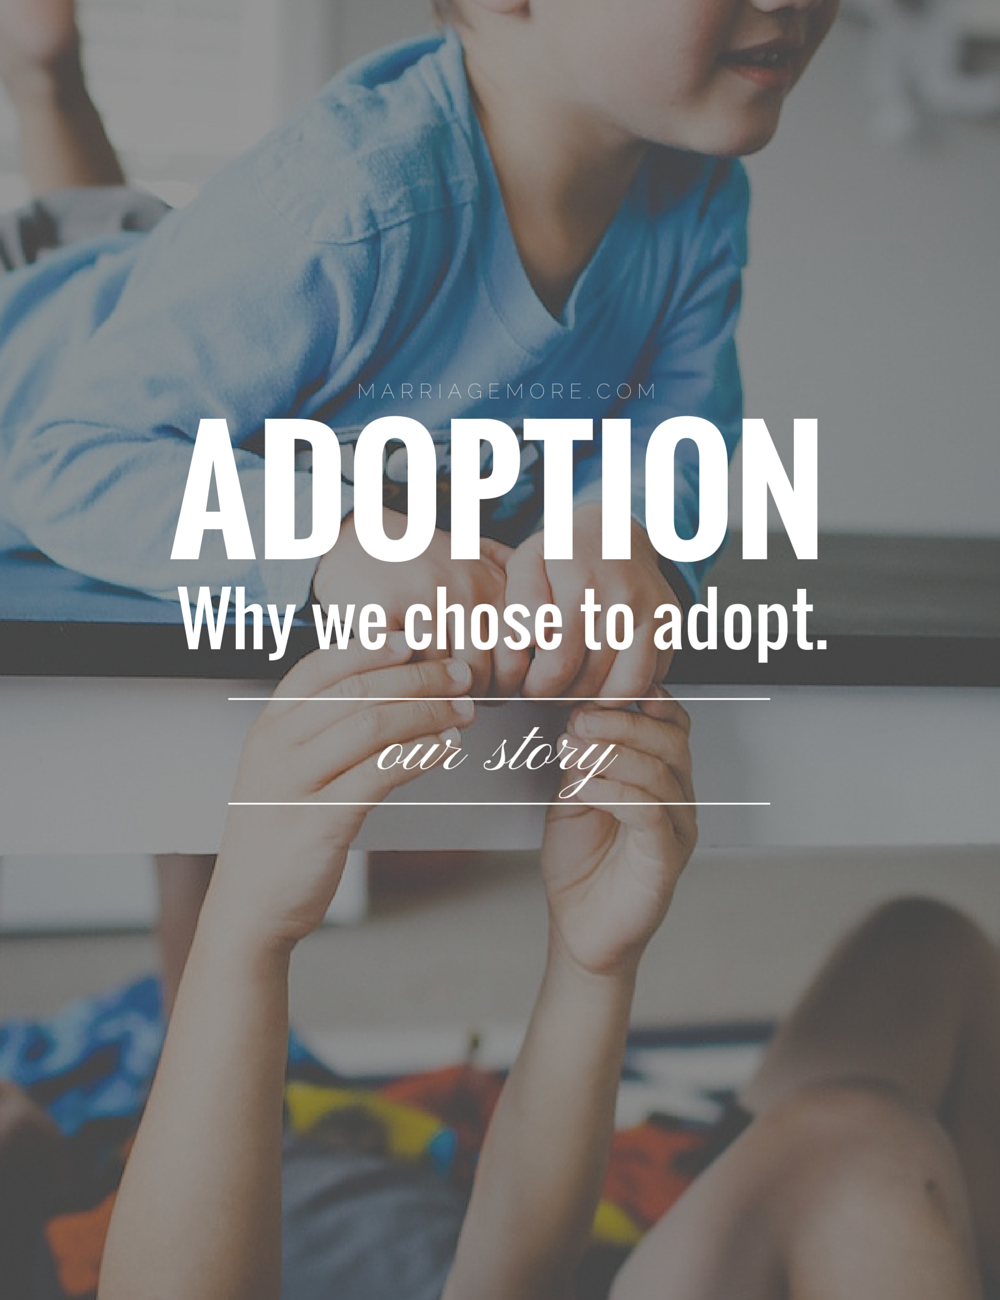 ADOPTION - THE REASON WE DECIDED TO ADOPT